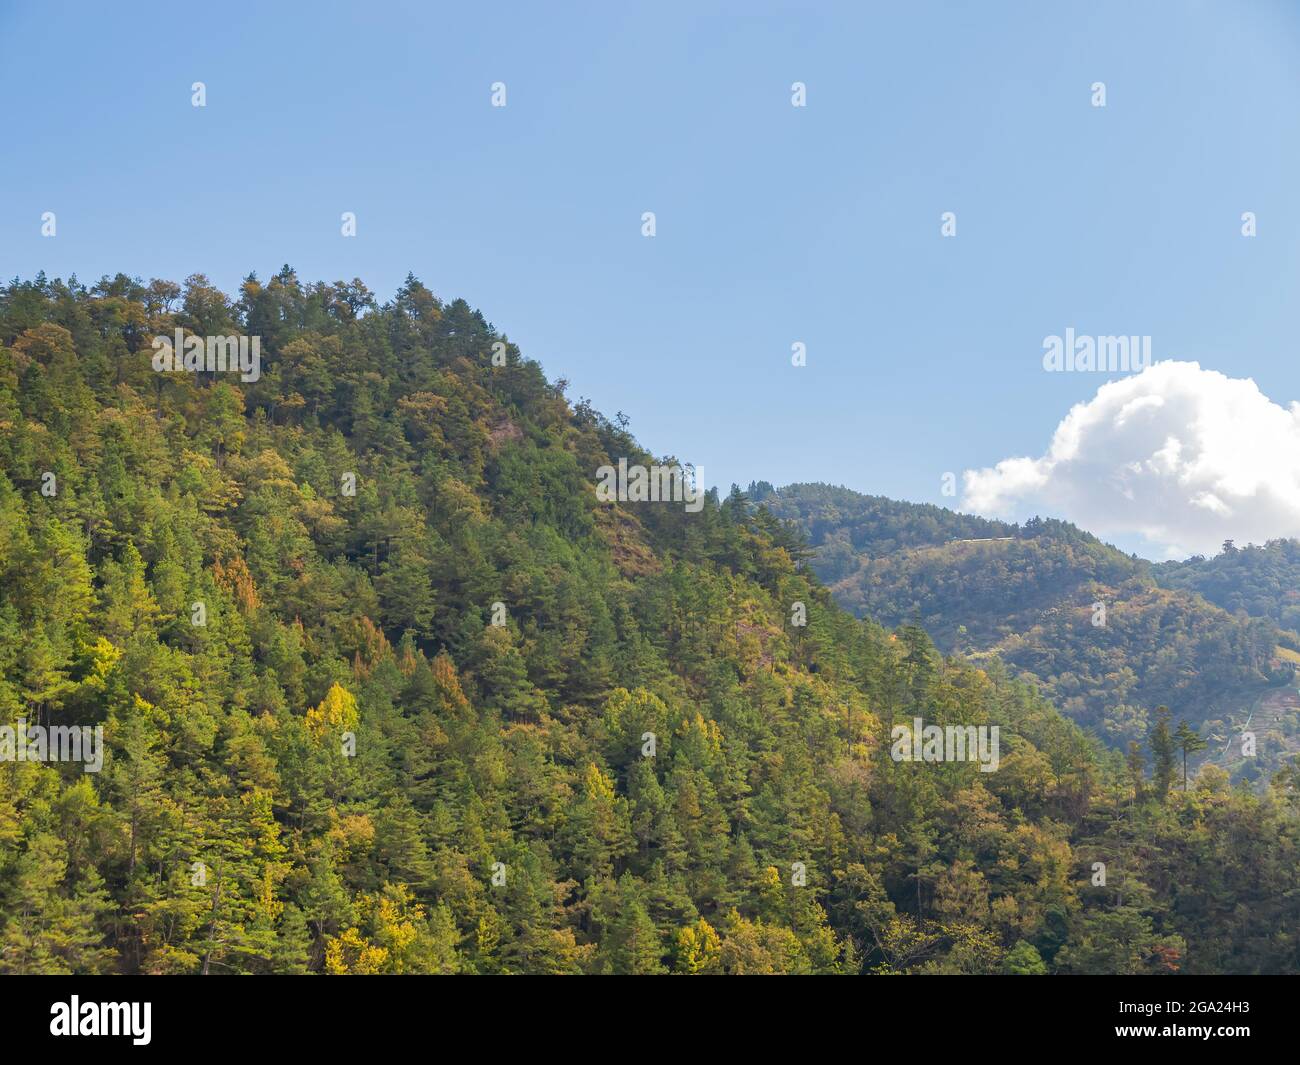 Autumn landscape in Wuling Farm at Taichung, Taiwan Stock Photo